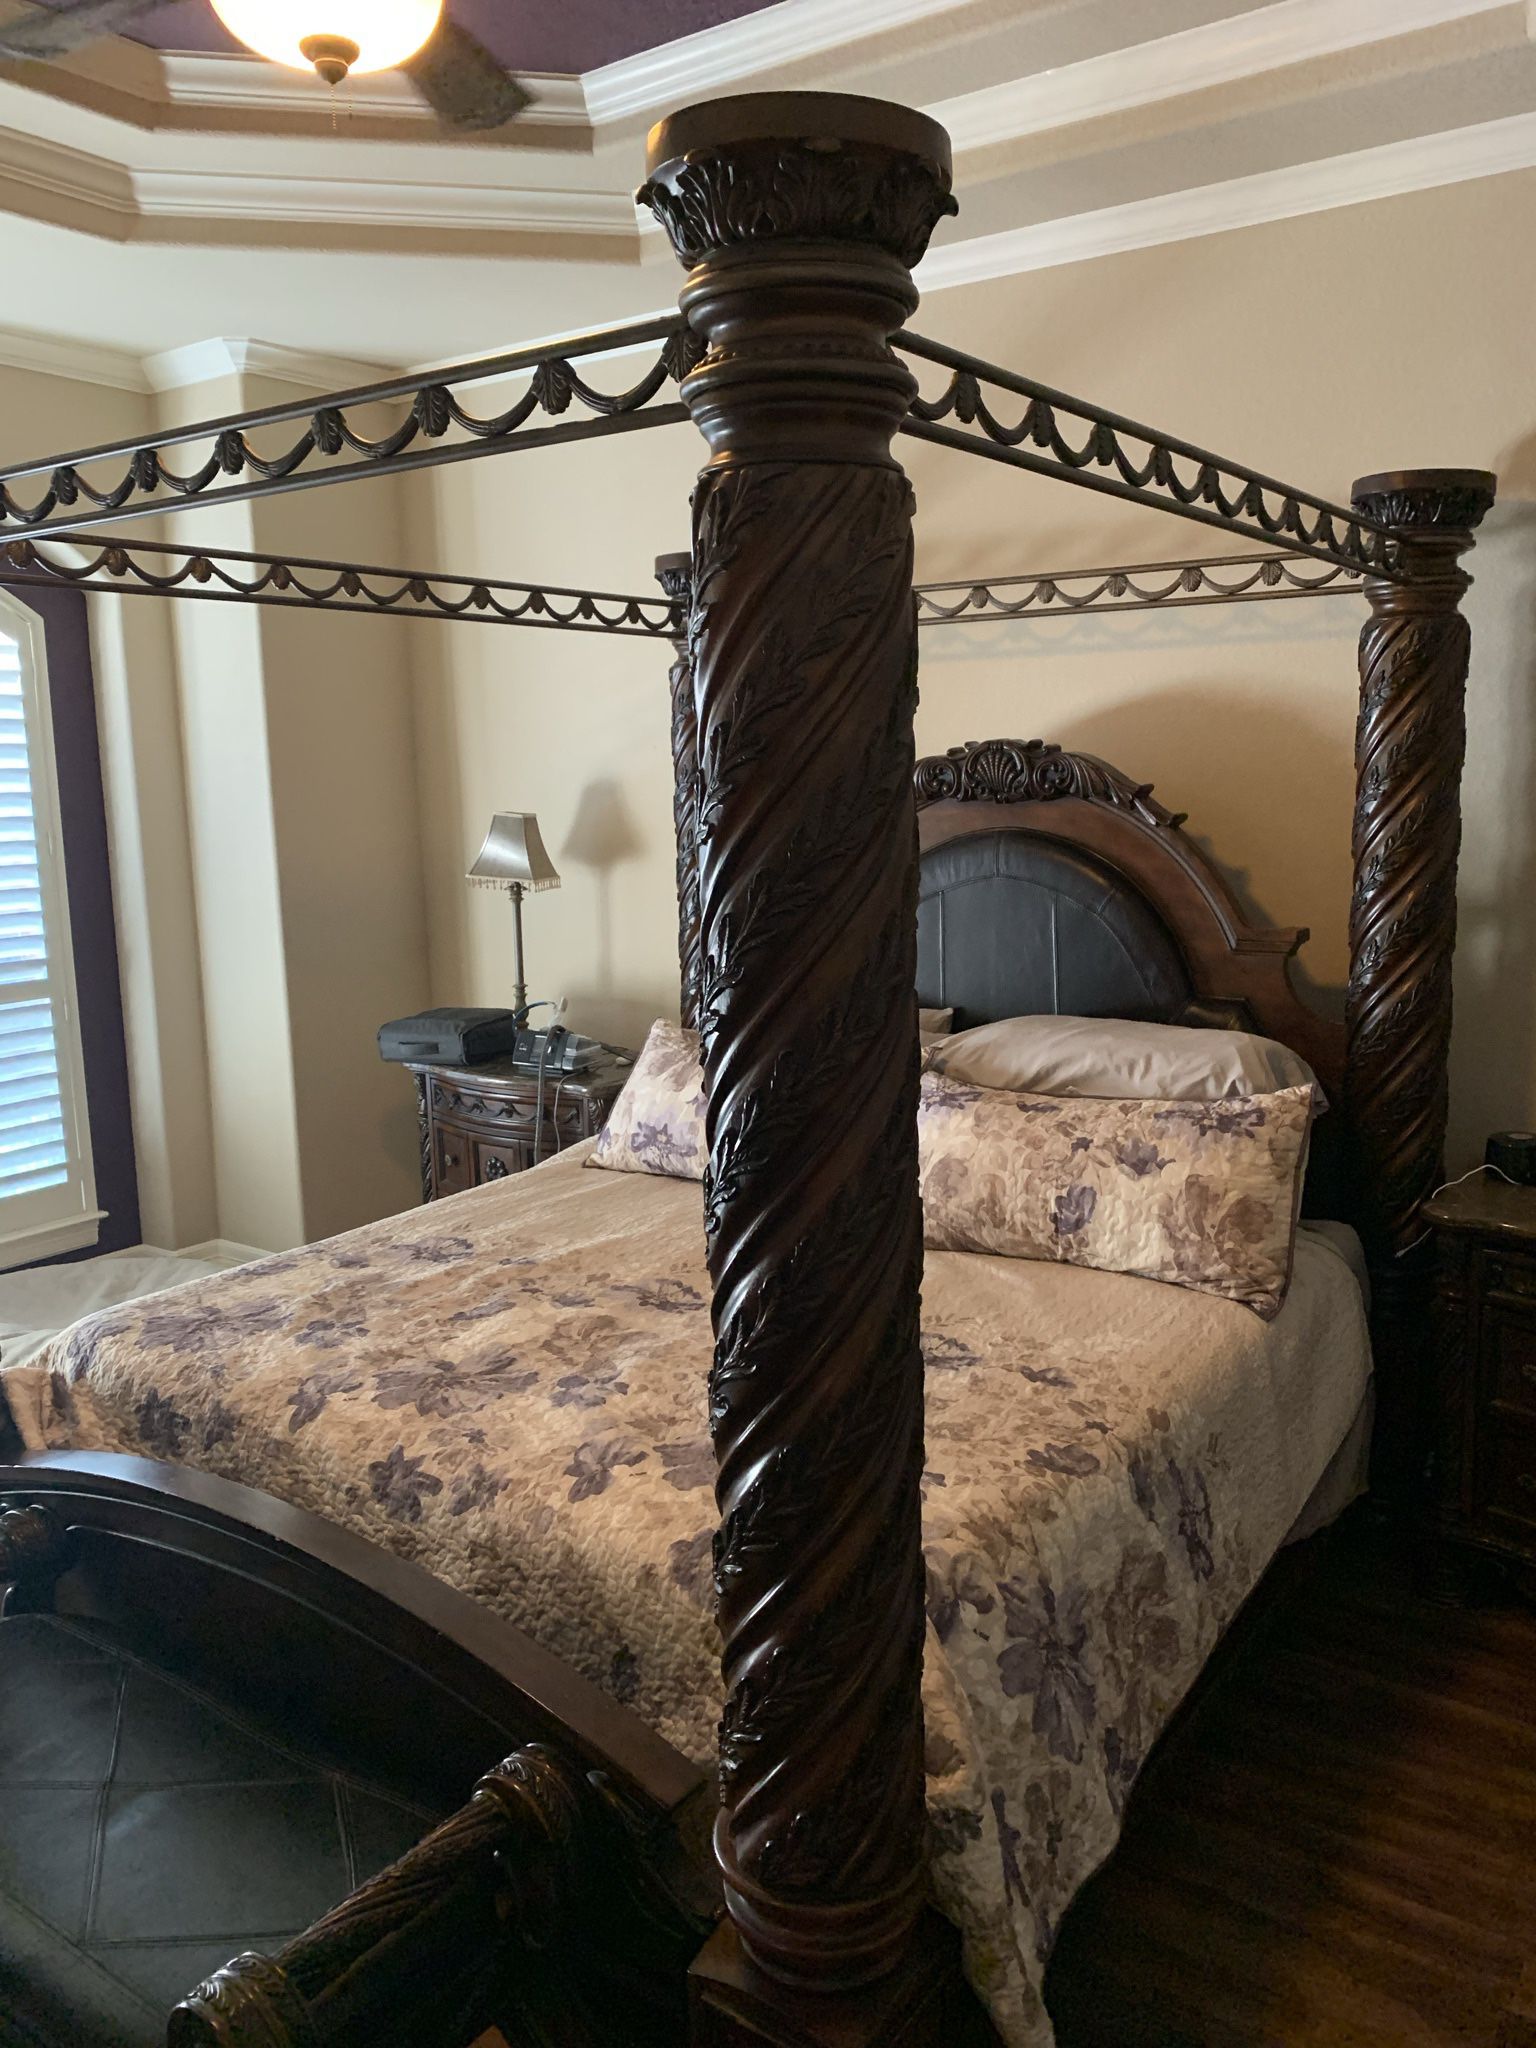 North shore Canopy Bed & Armoire 